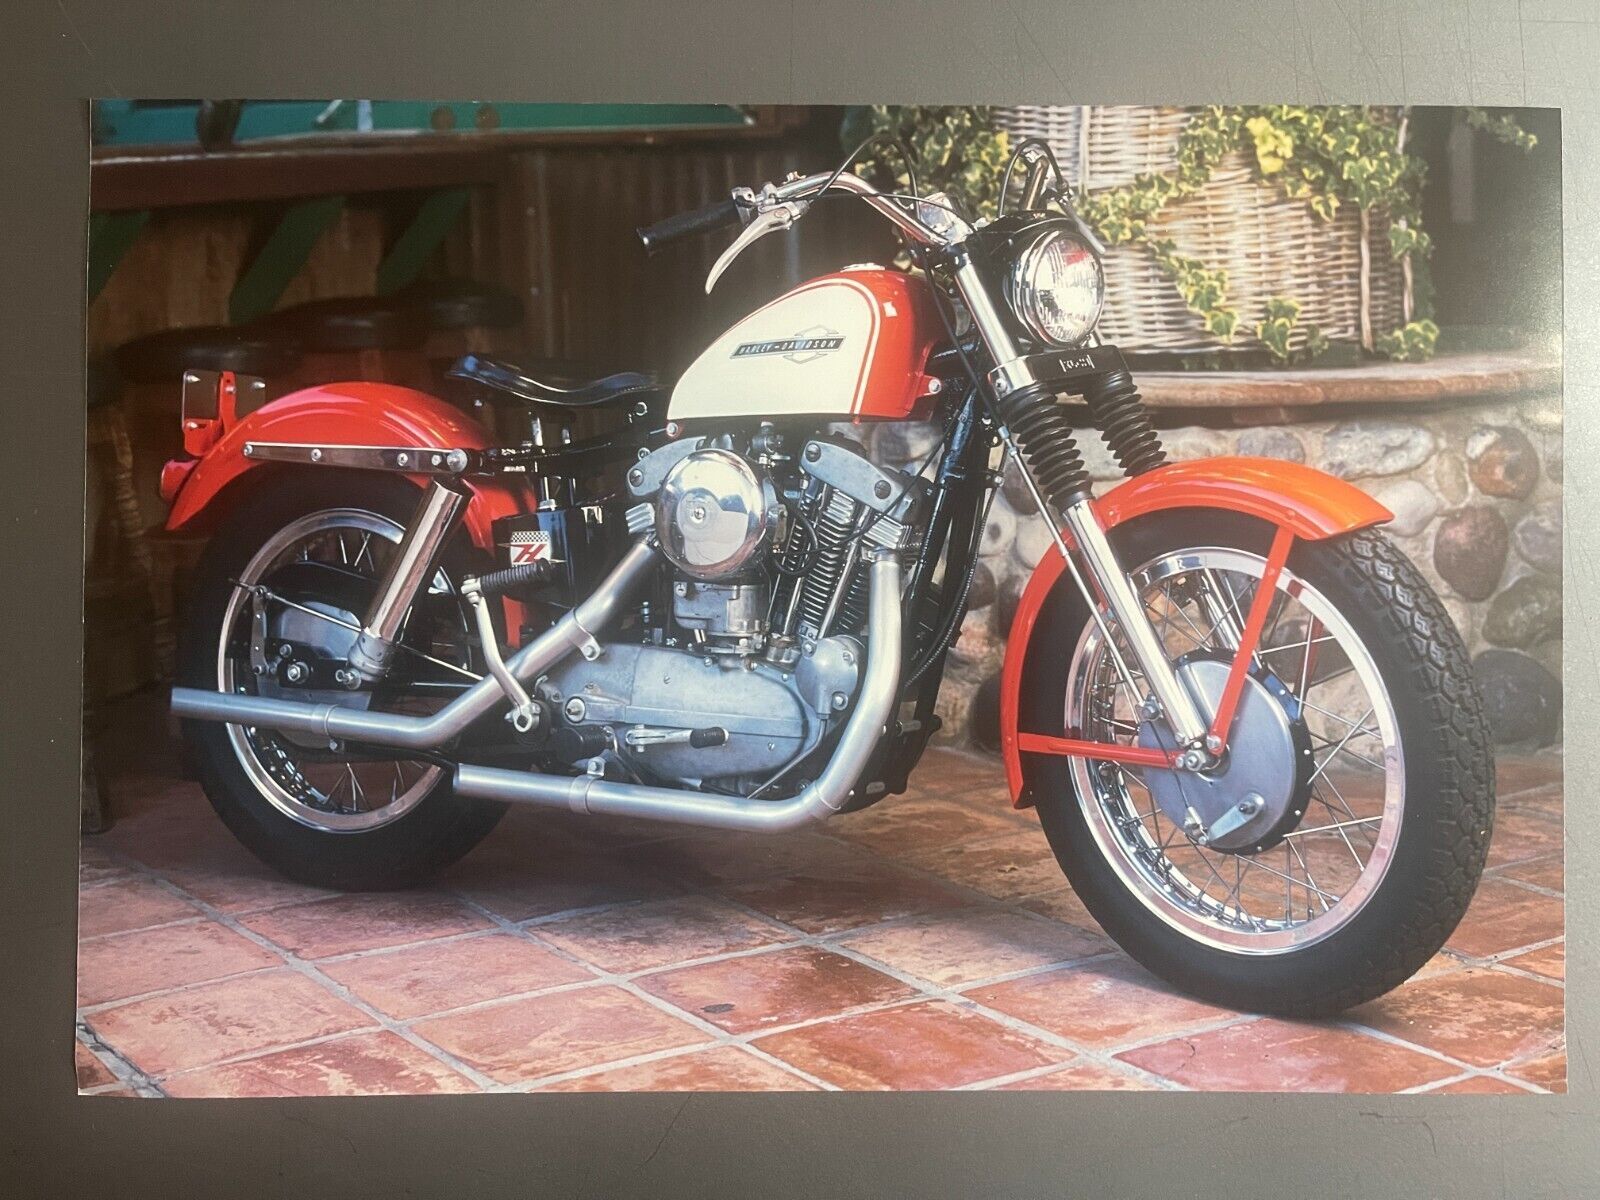 1963 Harley Davidson XLCH Sportster Motorcycle Picture, Print - RARE Awesome